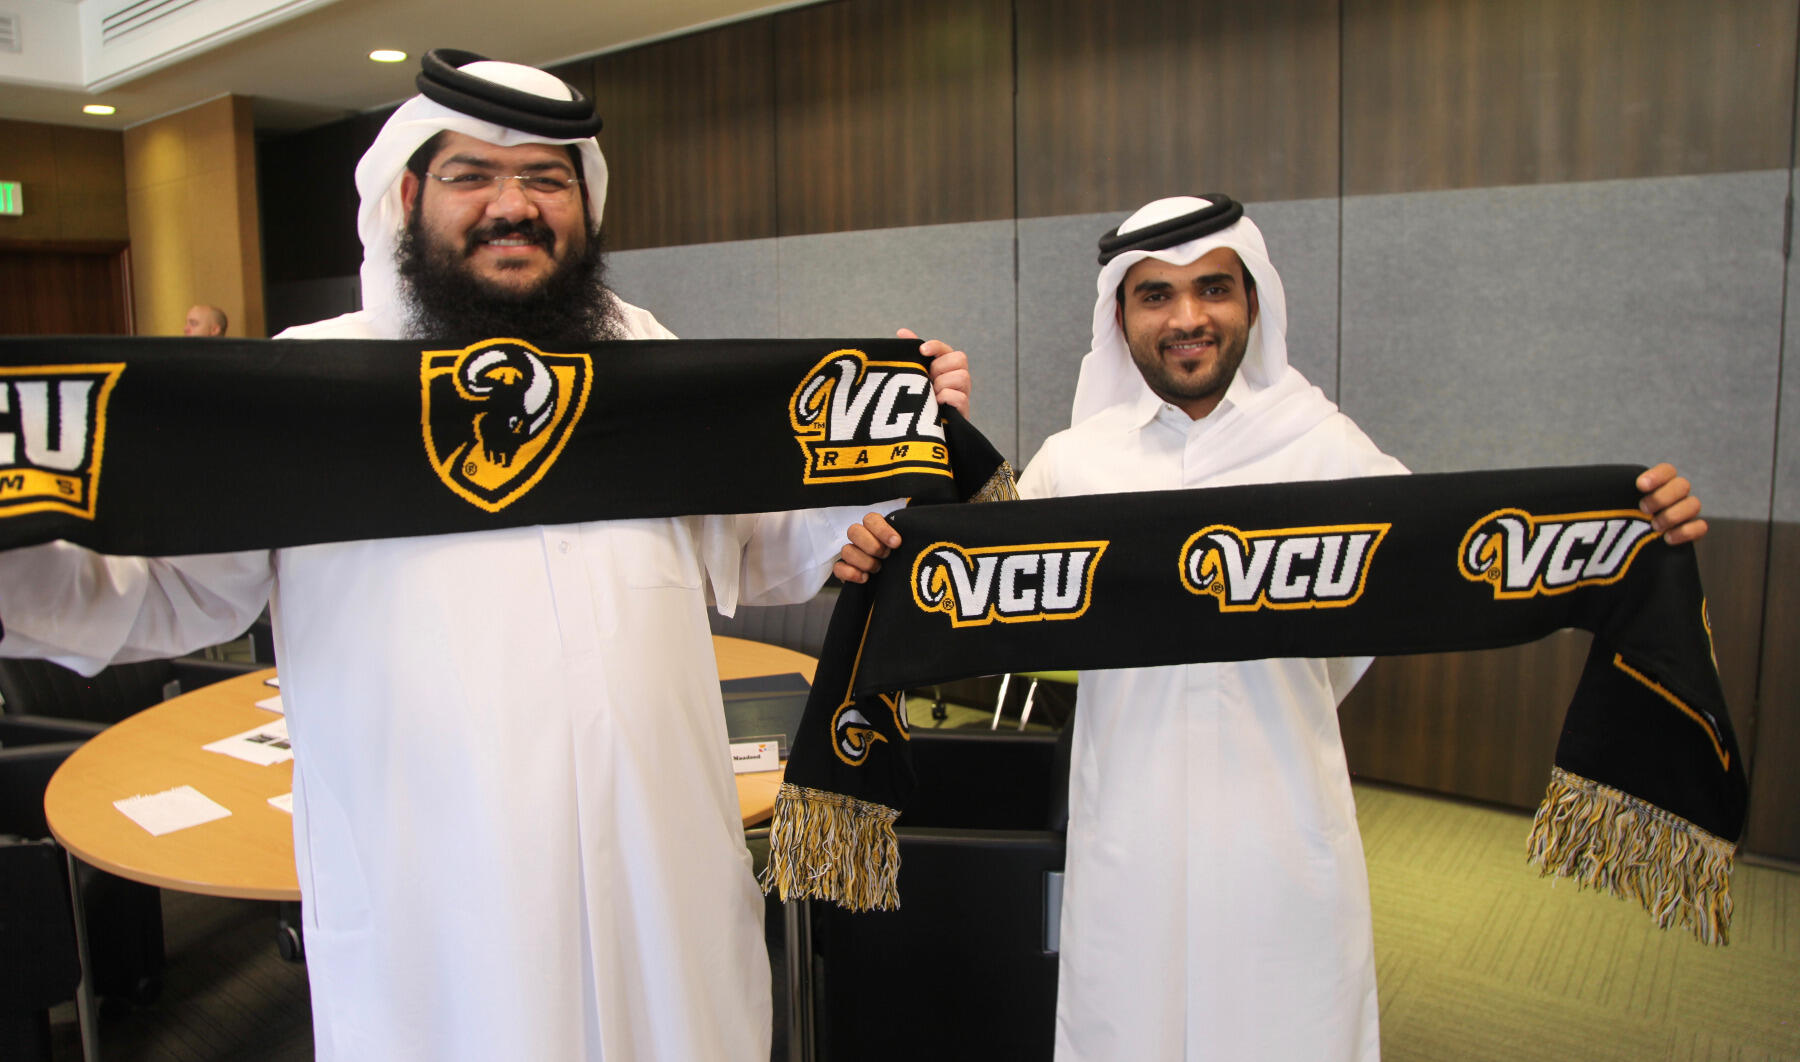 Two members of the Qatar Olympic Committee show off their VCU scarves, which were gifts from the Center for Sport Leadership upon completion of the program.